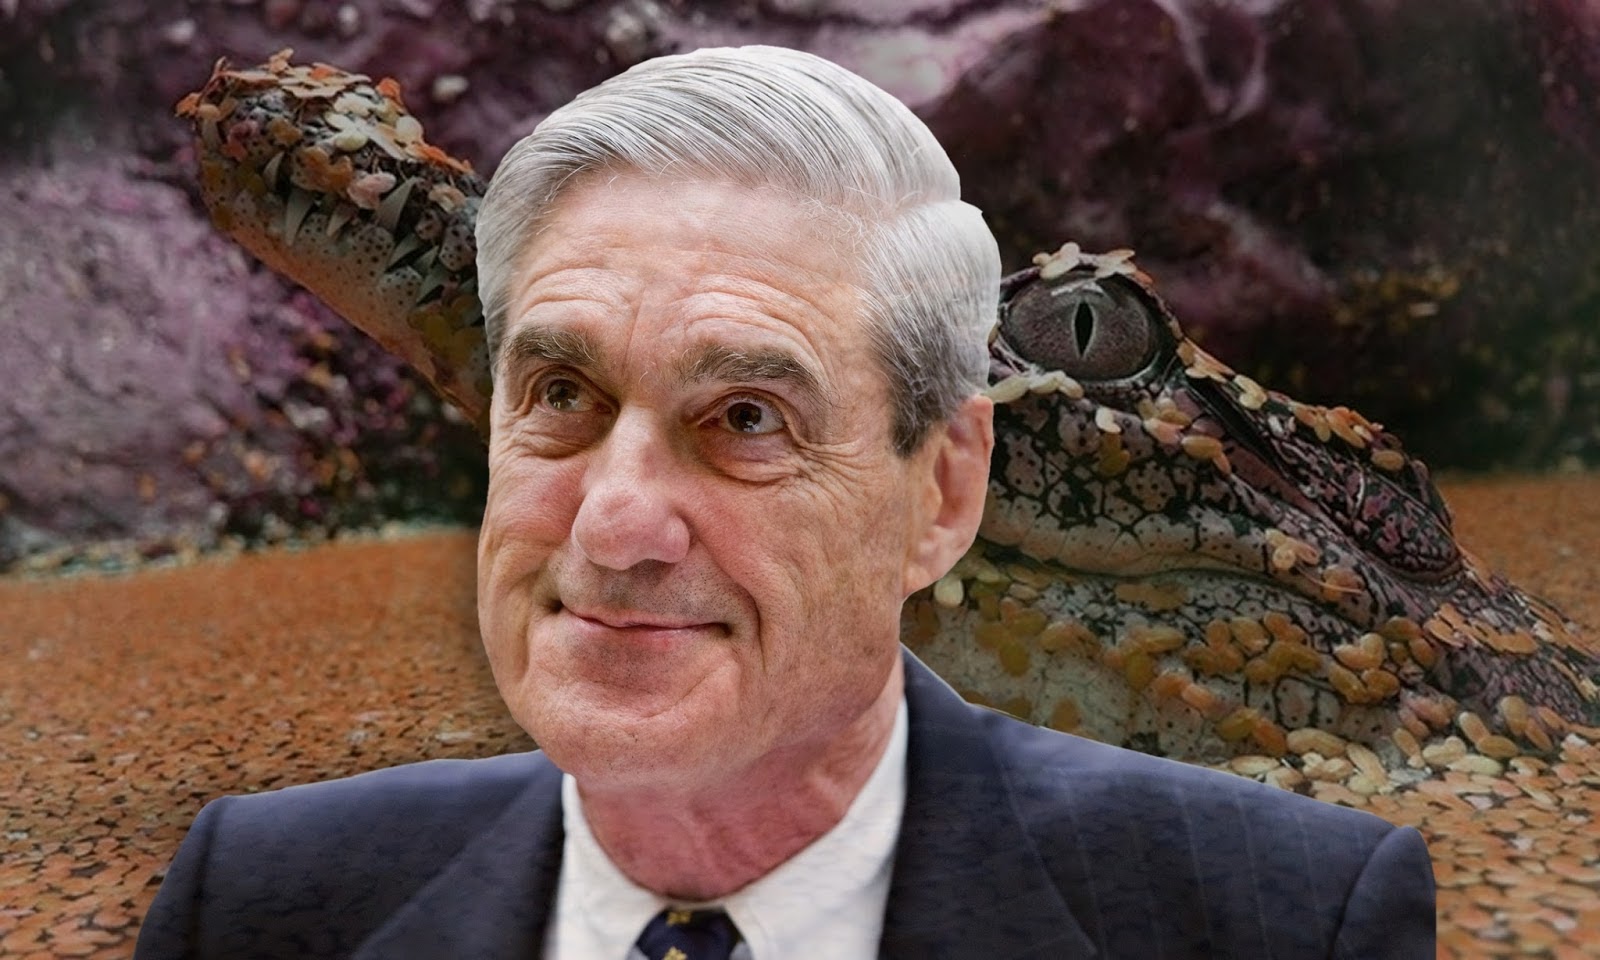 TOP 12 REASONS ROBERT MUELLER IS A HITMAN TO HIDE  THE PILGRIMS SOCIETY